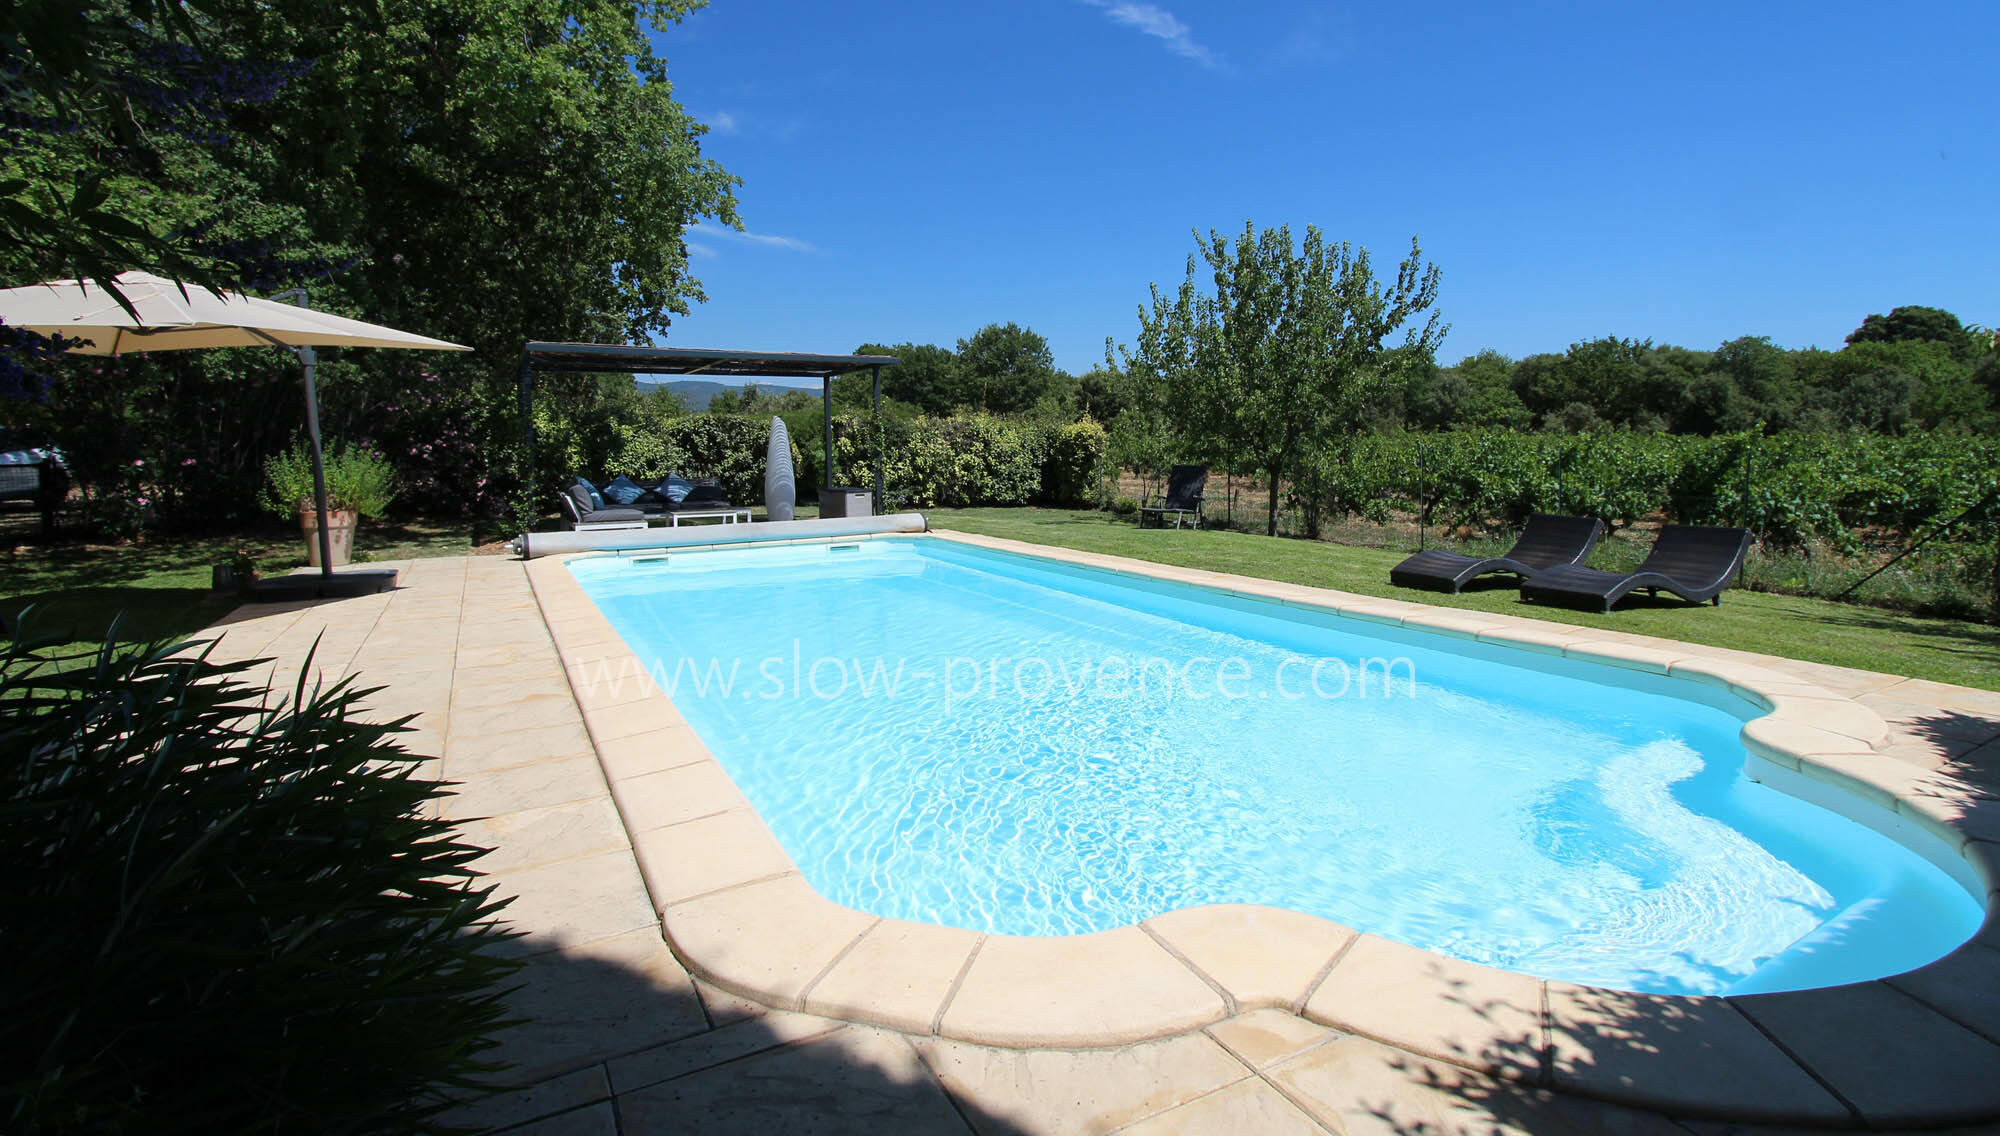 Pool heated by solar heating mats